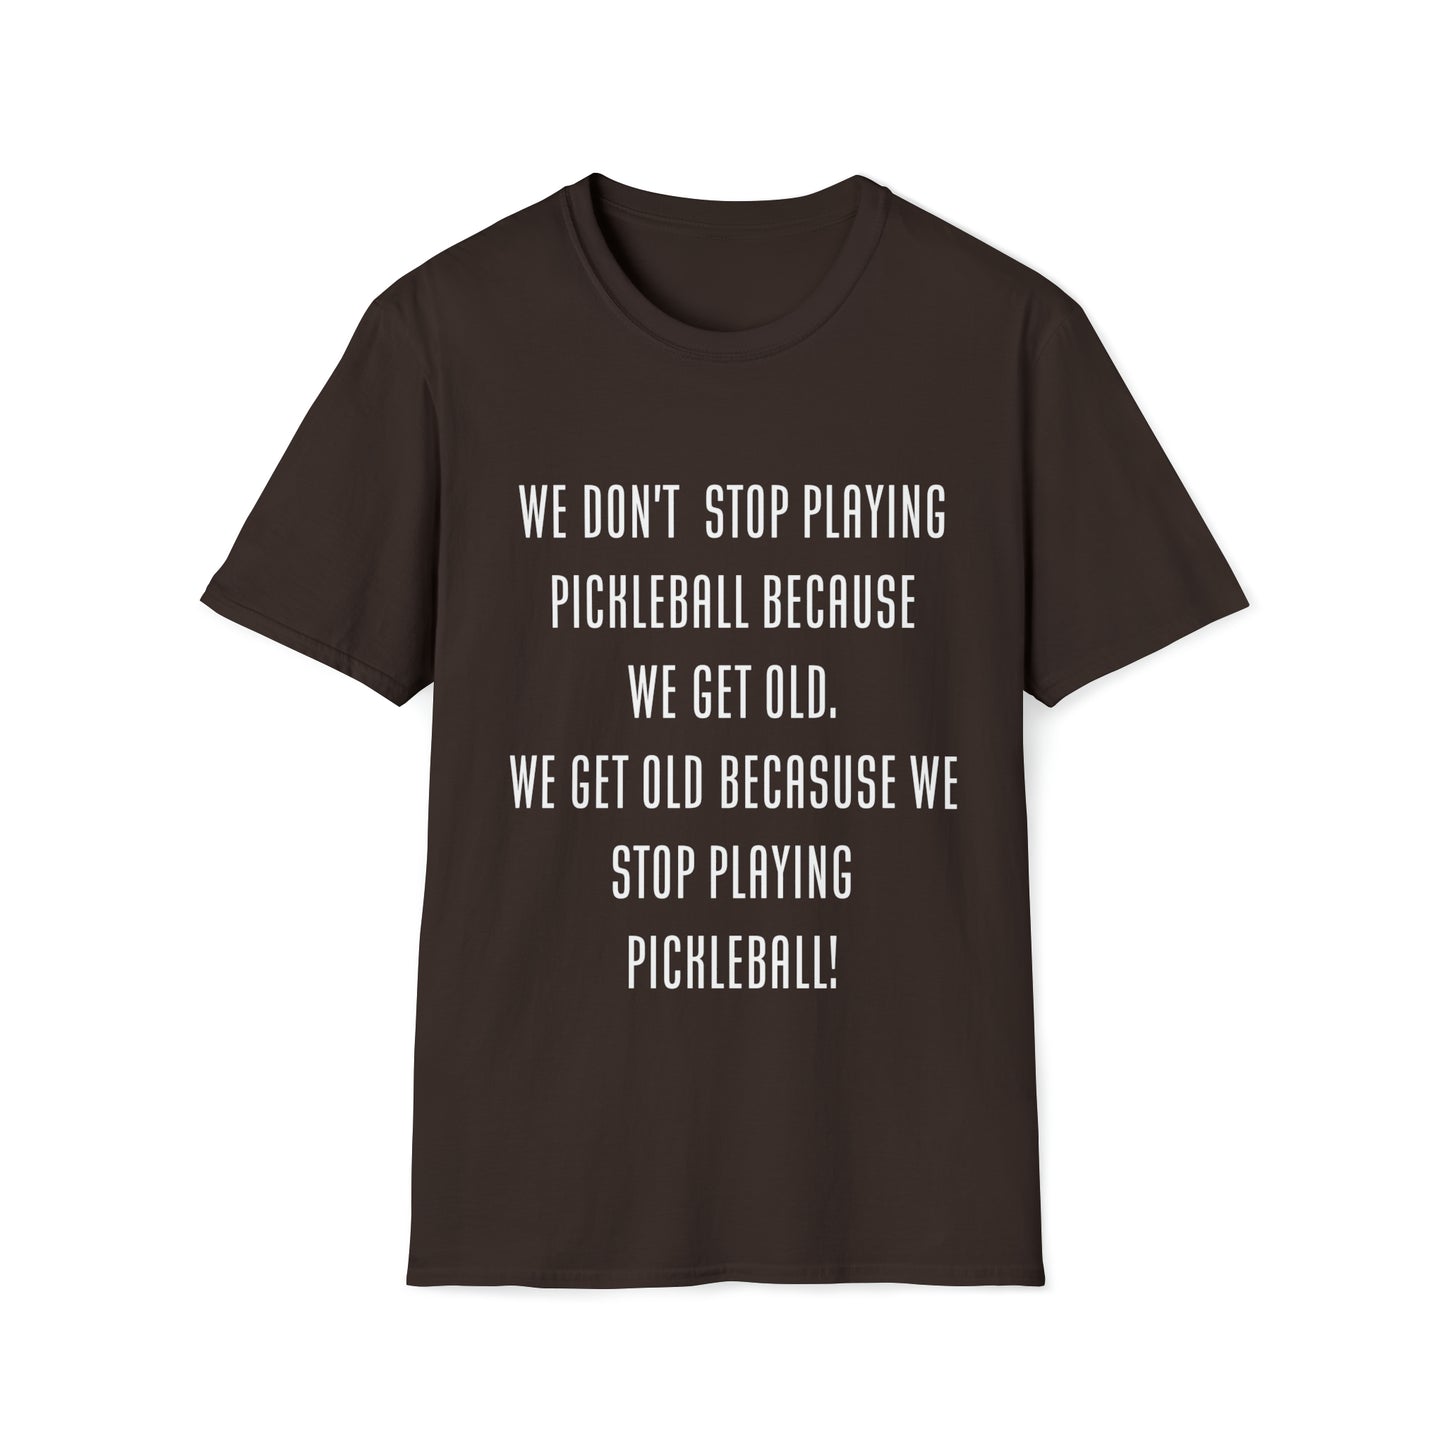 Pickleball Shirt - Makes a great gift!  Unisex Sizing - perfect for men or women!  Fun Pickleball quote